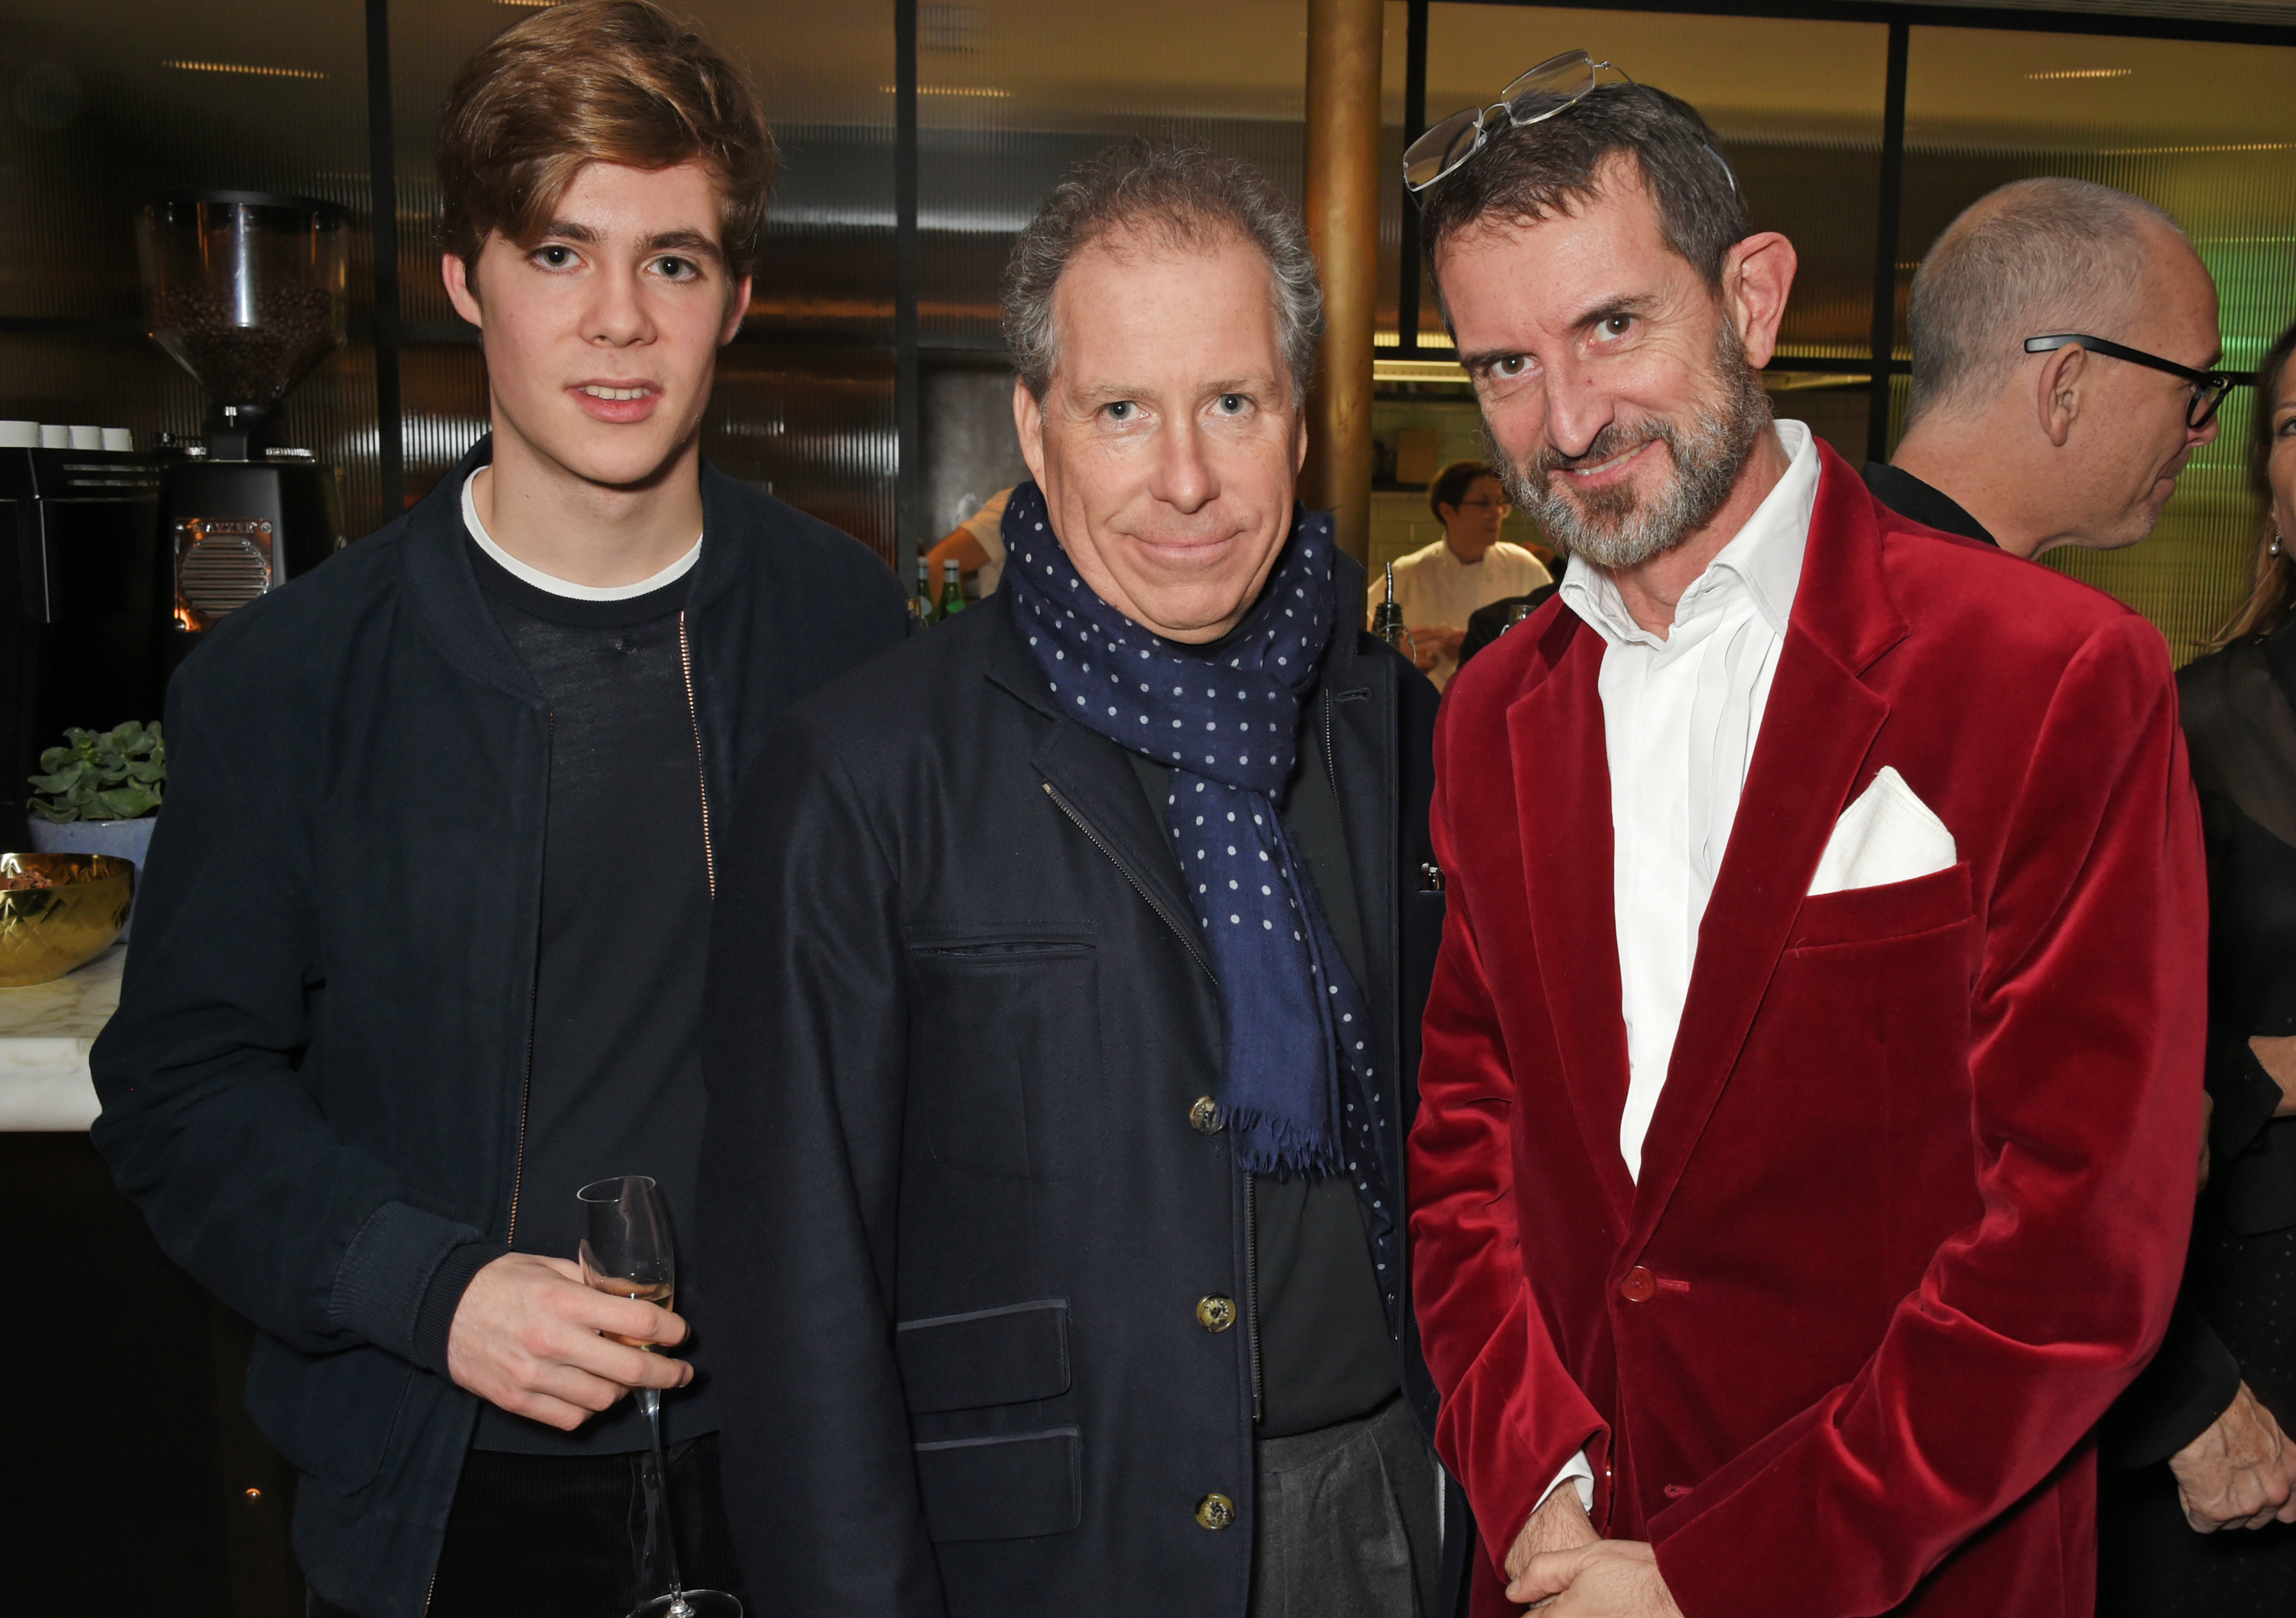 Charles Armstrong-Jones, David Armstrong-Jones and Manfredi della Gherardesca attend Alexander Dundas's 18th birthday party on December 16, 2017 in London, England. | Source: Getty Images